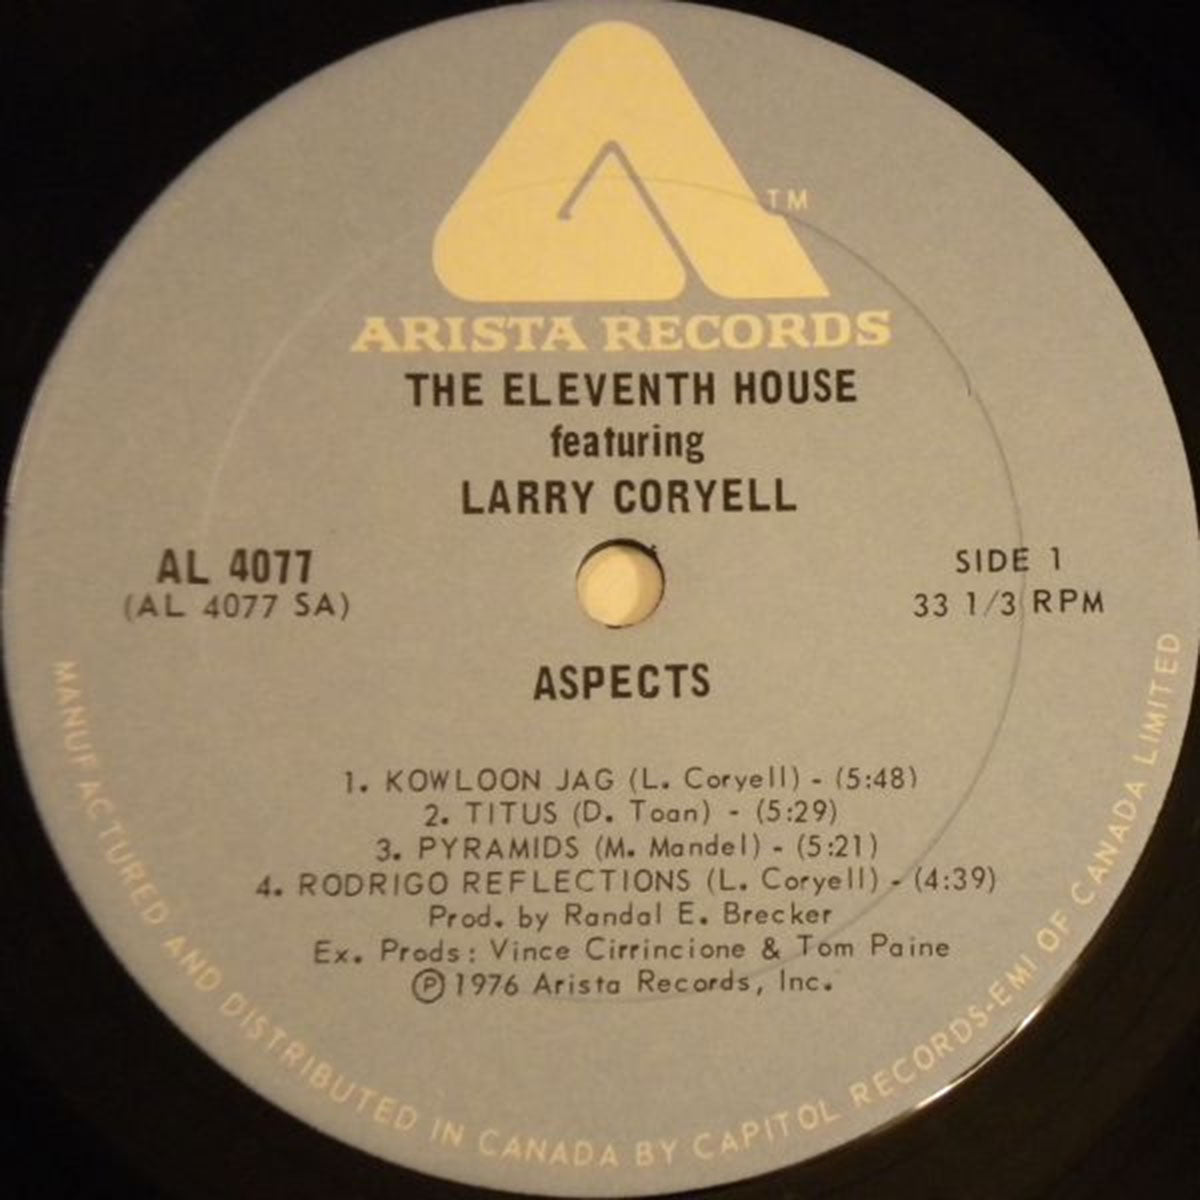 The Eleventh House Featuring Larry Coryell – Aspects